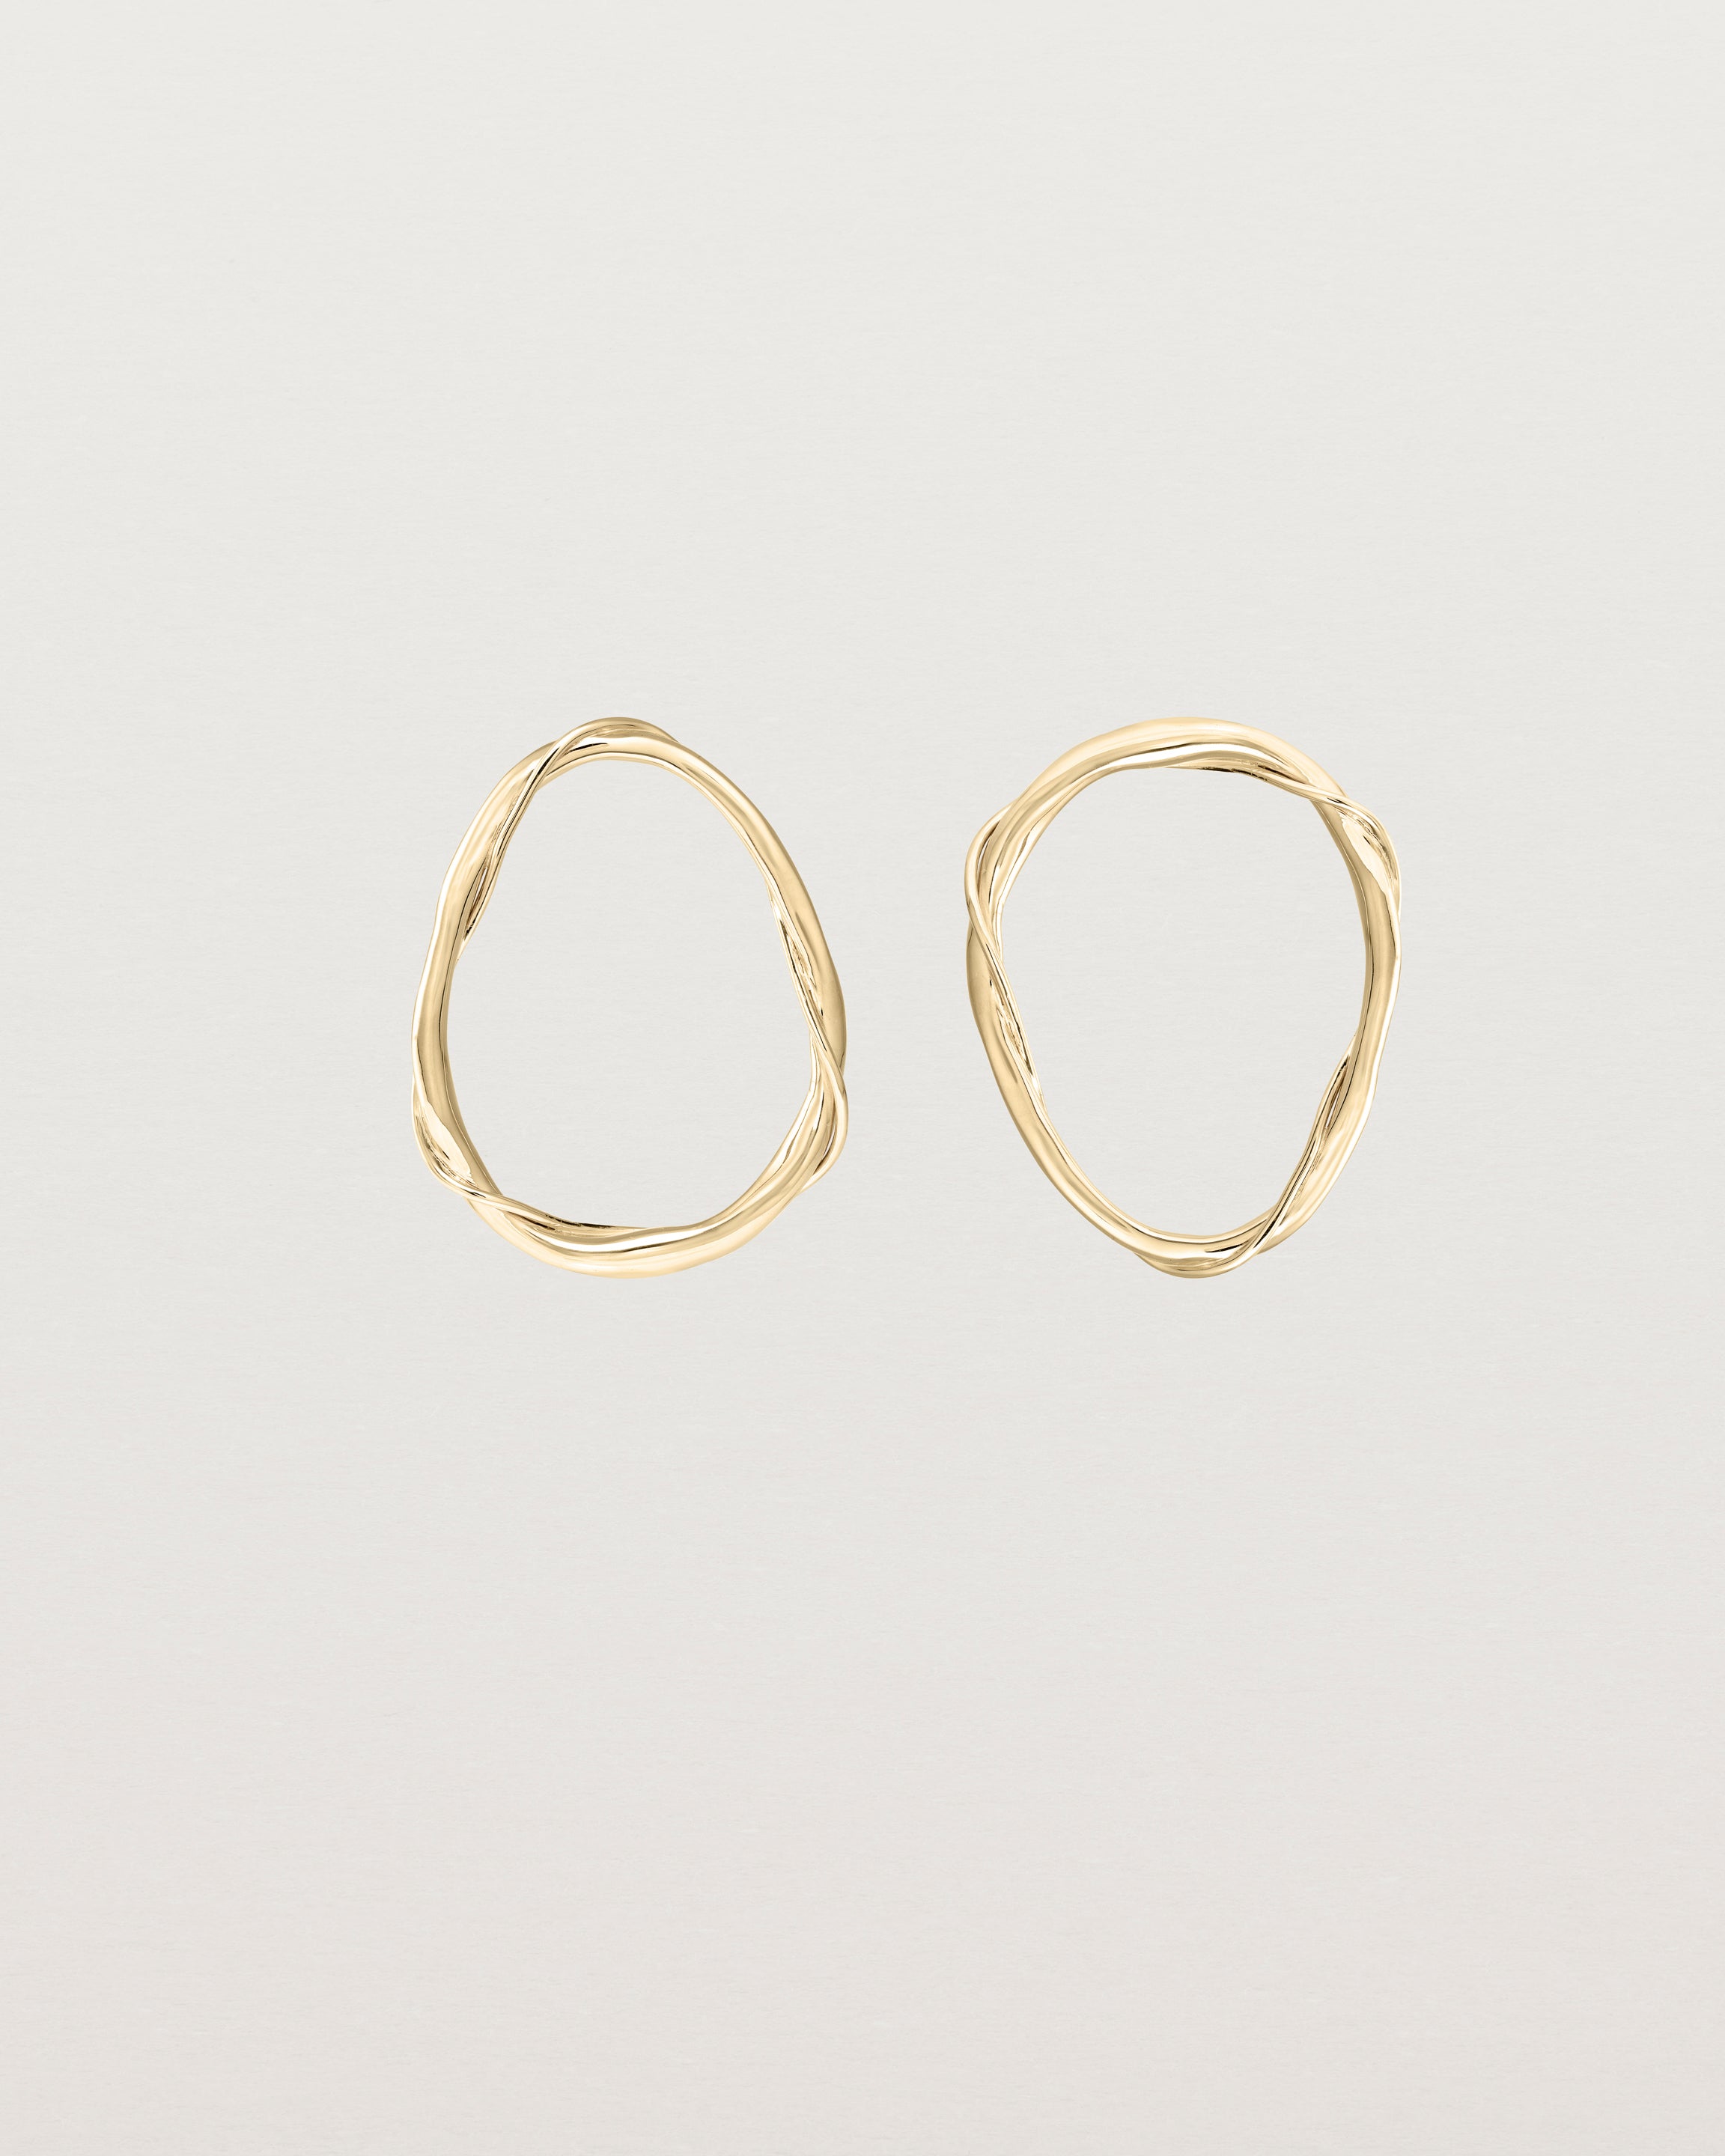 Front view of the Dalí Earrings in yellow gold.